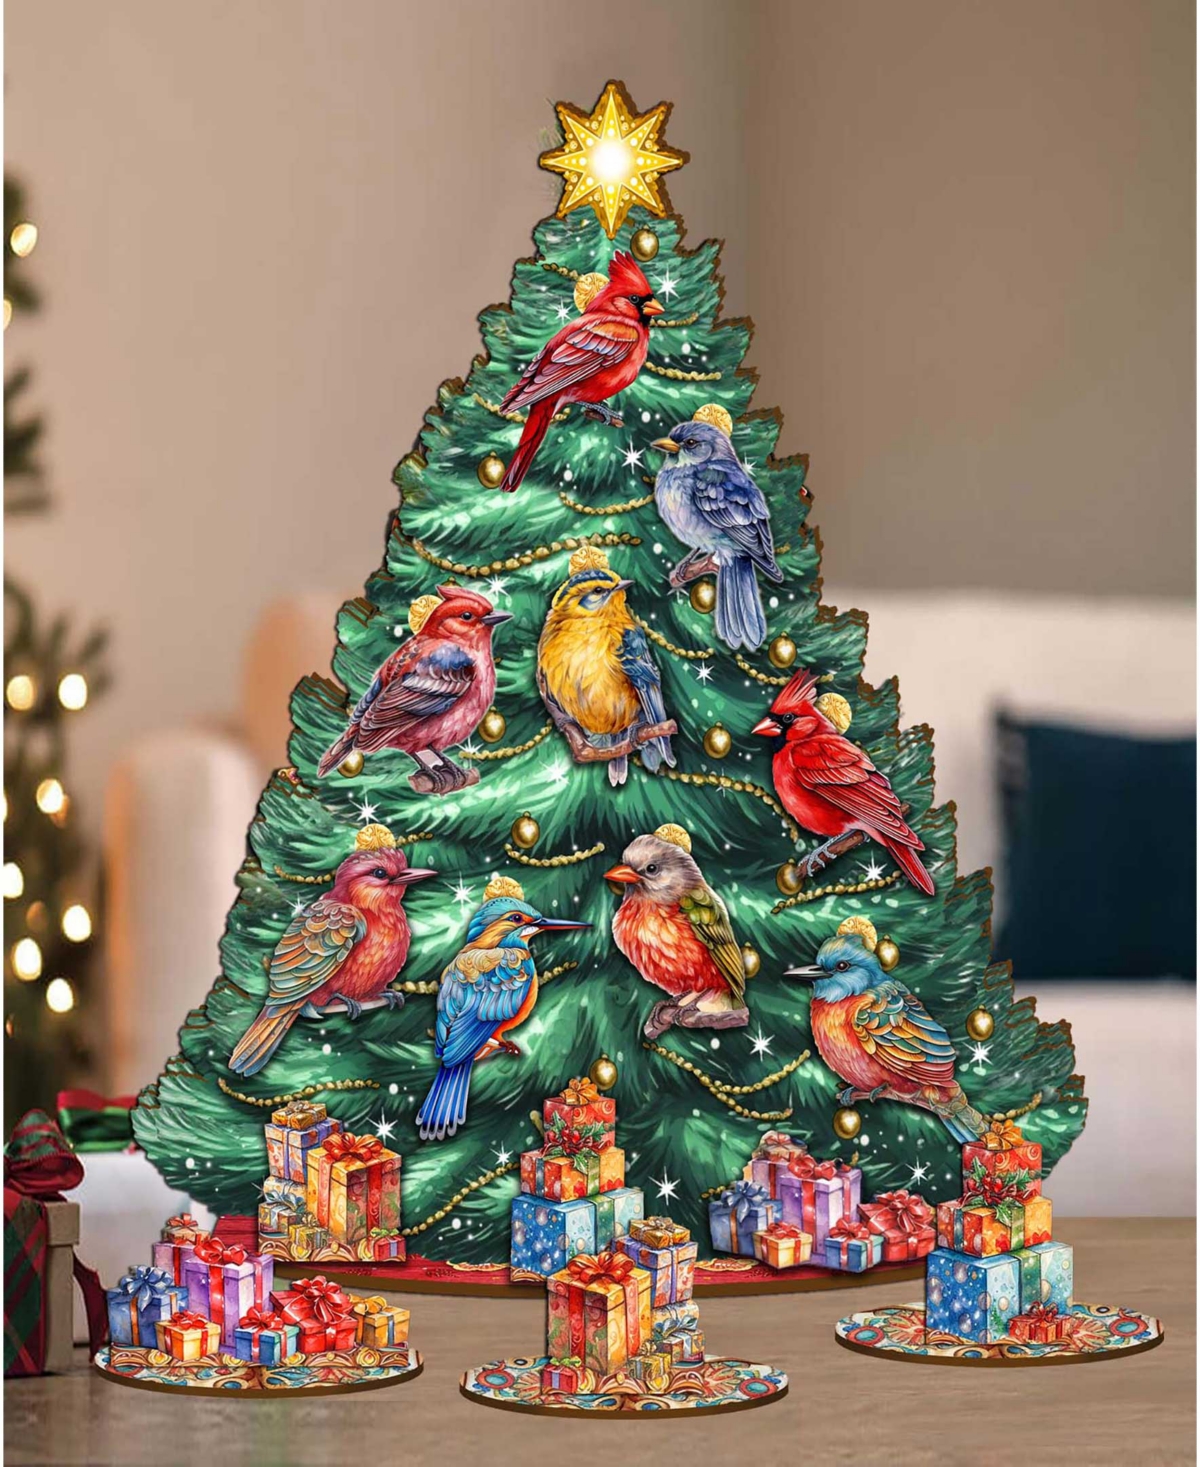 Shop Designocracy Christmas Birds Themed Wooden Christmas Tree With Ornaments Set Of 13 G. Debrekht In Multi Color